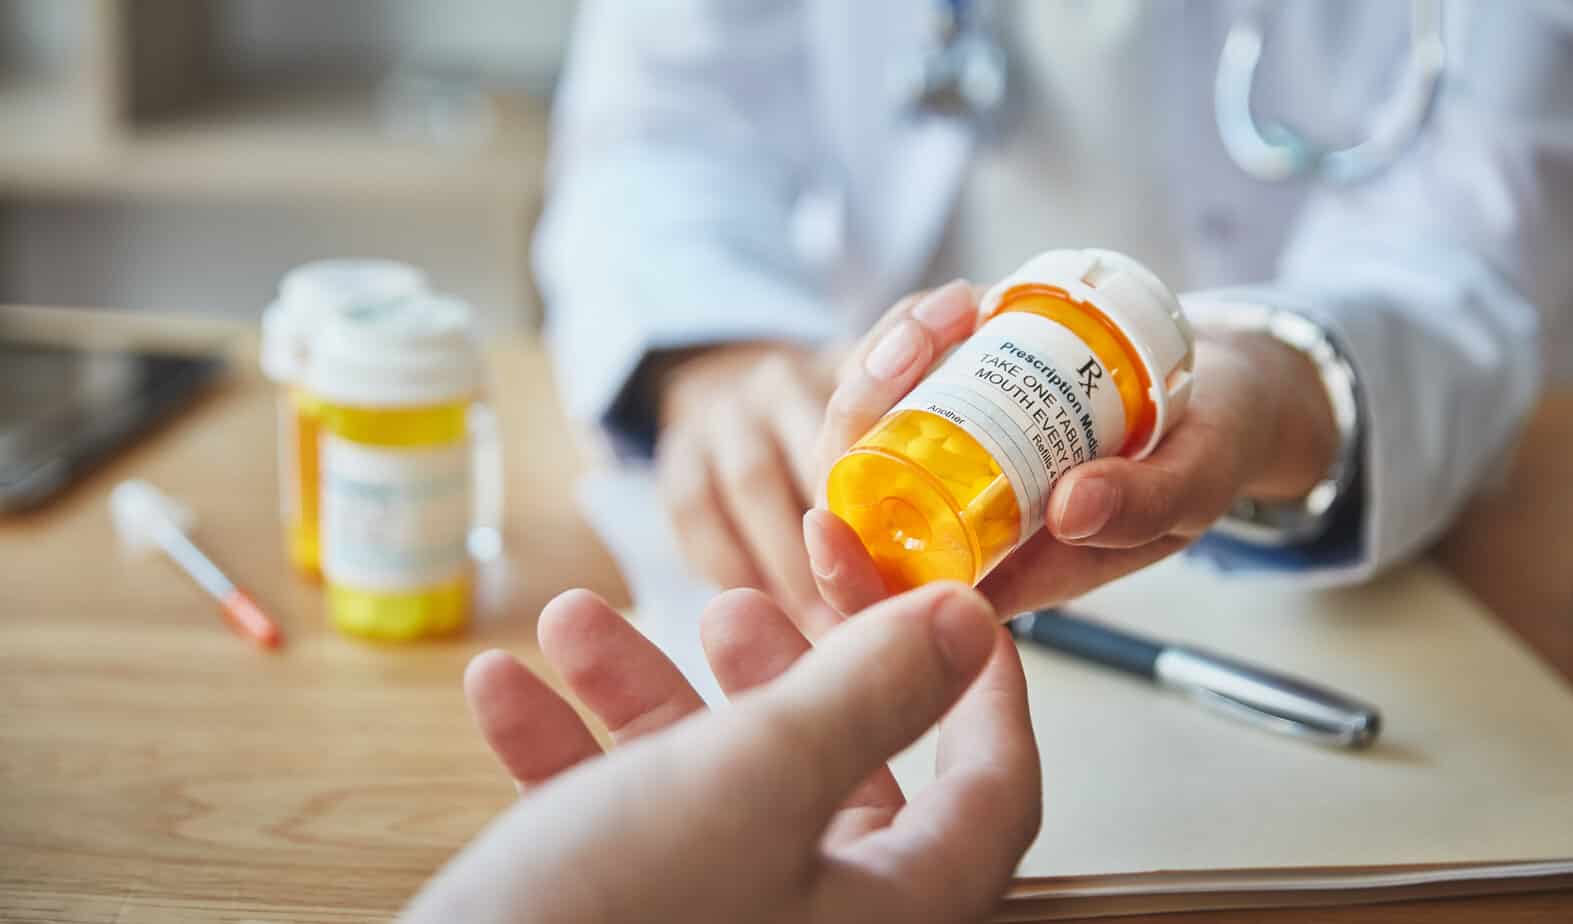 Doctor prescribing pill medication and handing bottle over to patient